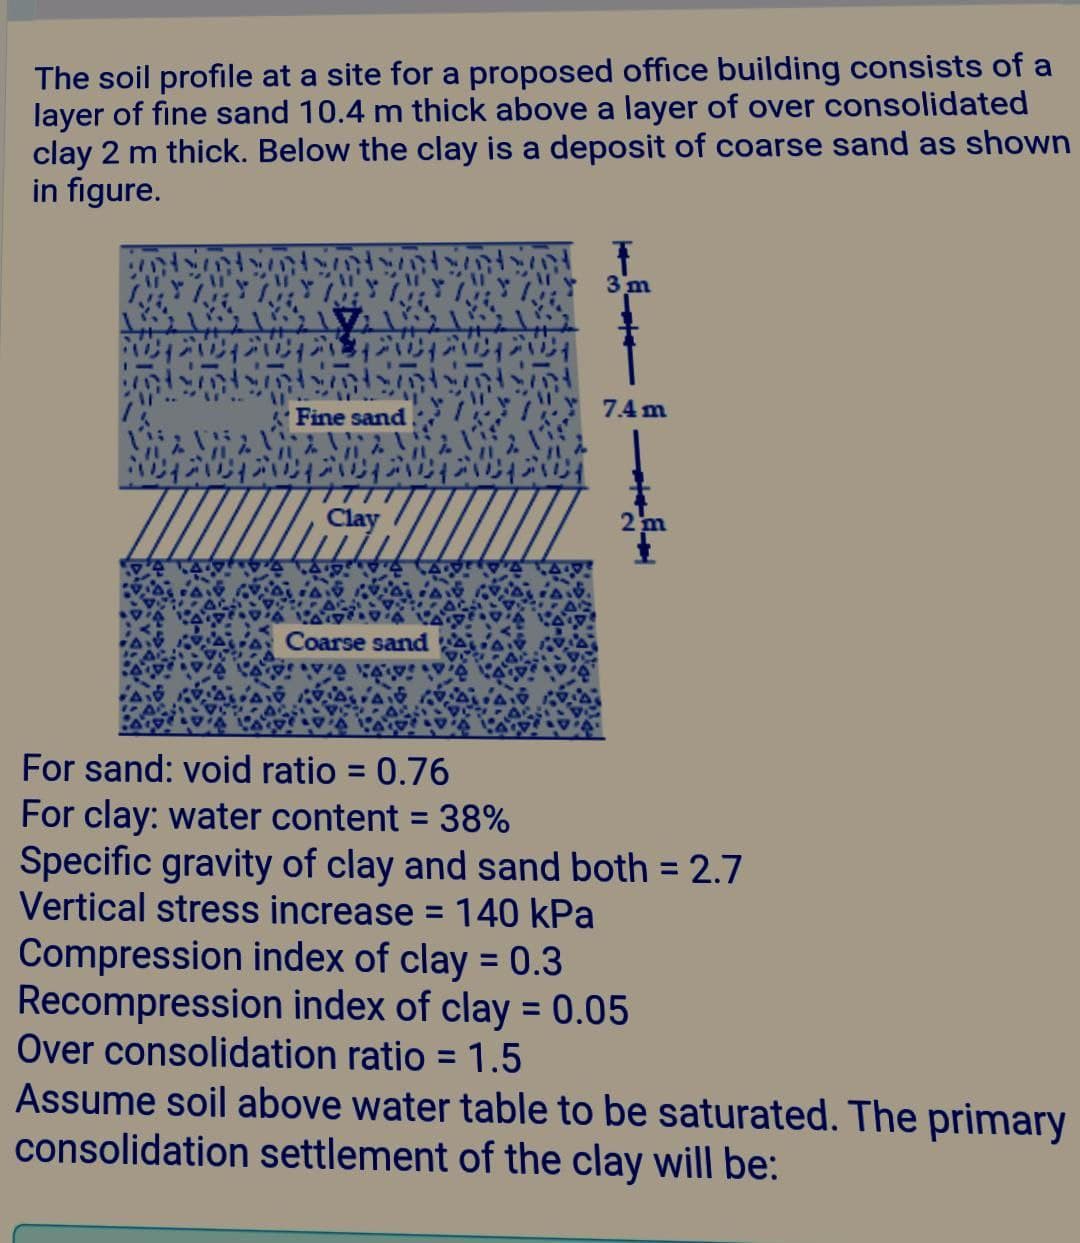 The soil profile at a site for a proposed office building consists of a
layer of fine sand 10.4 m thick above a layer of over consolidated
clay 2 m thick. Below the clay is a deposit of coarse sand as shown
in figure.
3 m
Fine sand
7.4 m
94'ן0ג ןש21ן09ןוגוה2 ןשה
Clay
Coarse sand
For sand: void ratio = 0.76
For clay: water content = 38%
Specific gravity of clay and sand both = 2.7
Vertical stress increase = 140 kPa
%3D
Compression index of clay = 0.3
Recompression index of clay = 0.05
Over consolidation ratio = 1.5
Assume soil above water table to be saturated. The primary
consolidation settlement of the clay will be:
%3D
%3D
%3D
2.
